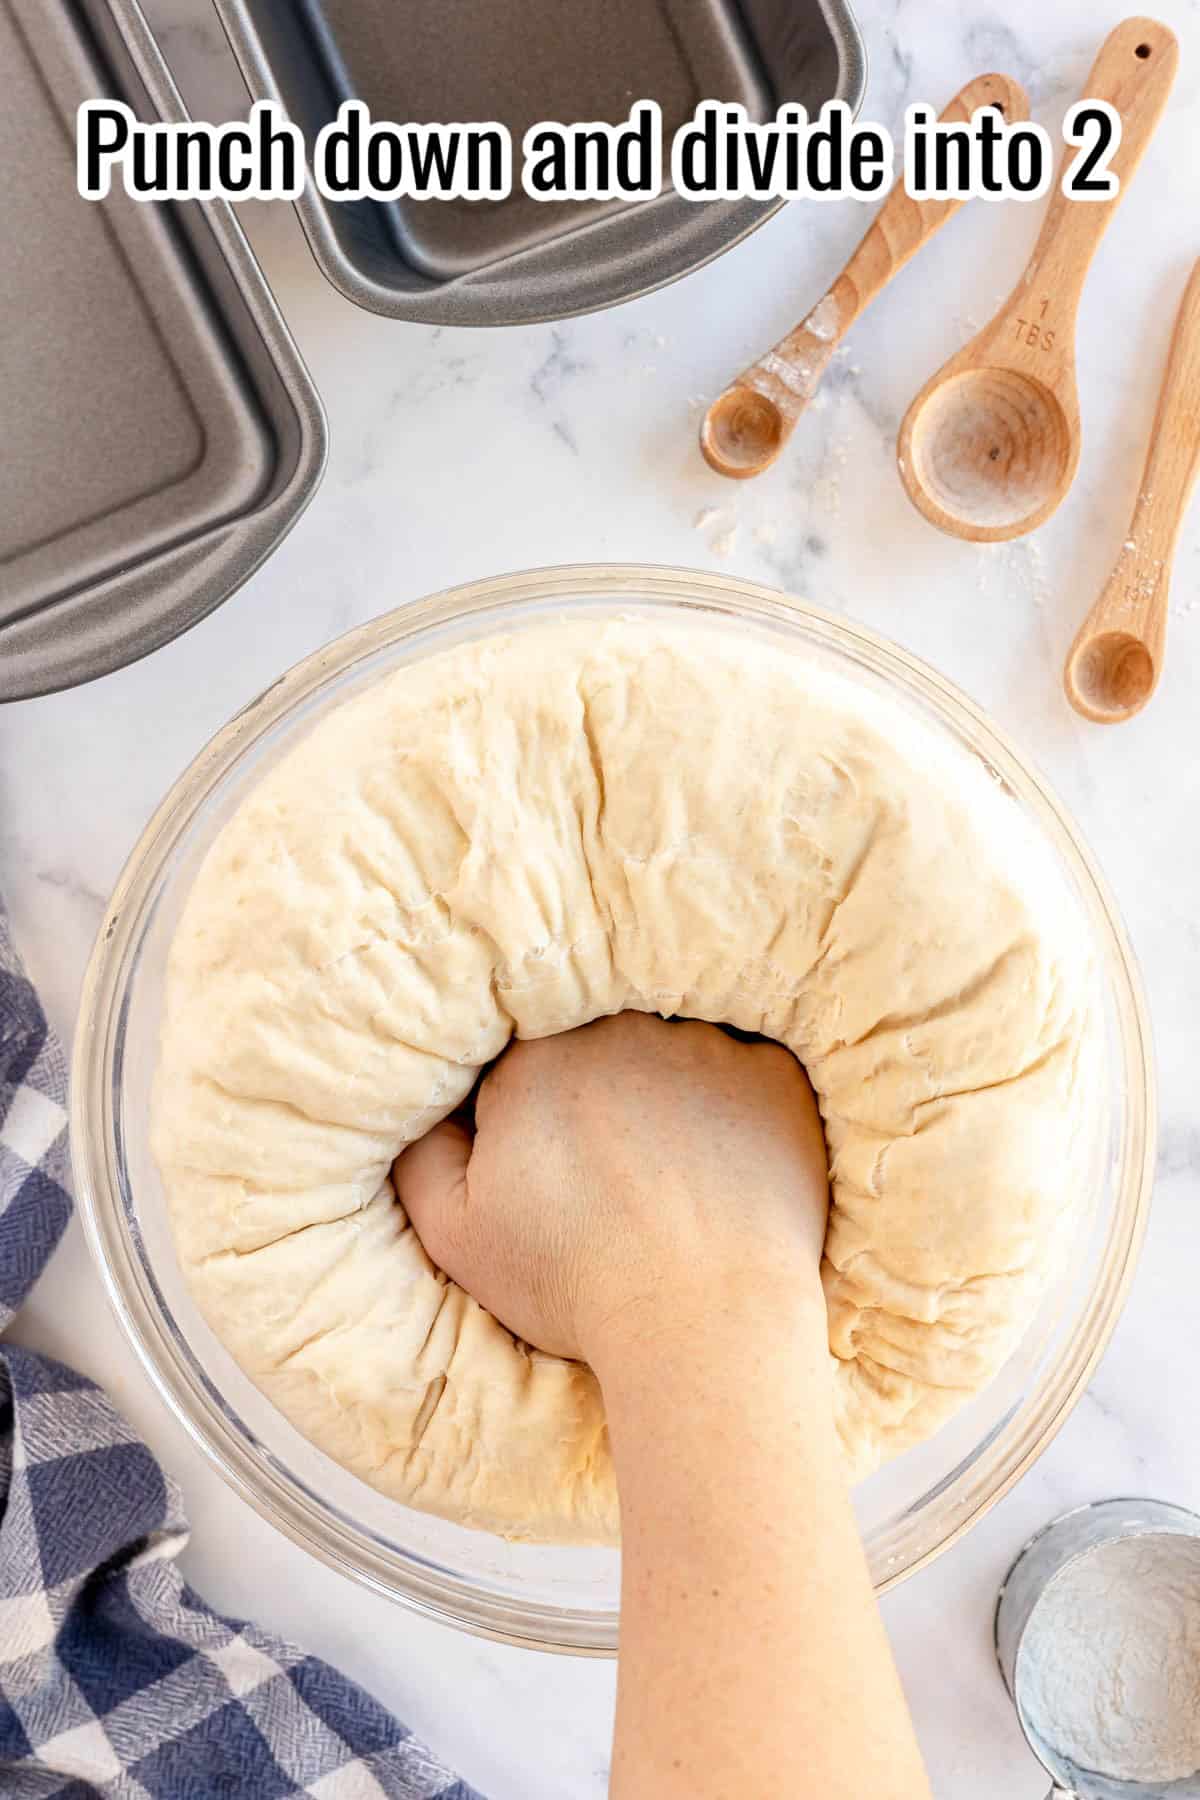 A hand is punching down dough in a clear bowl on a marble surface with a text overlay saying "Punch down and divide into 2."